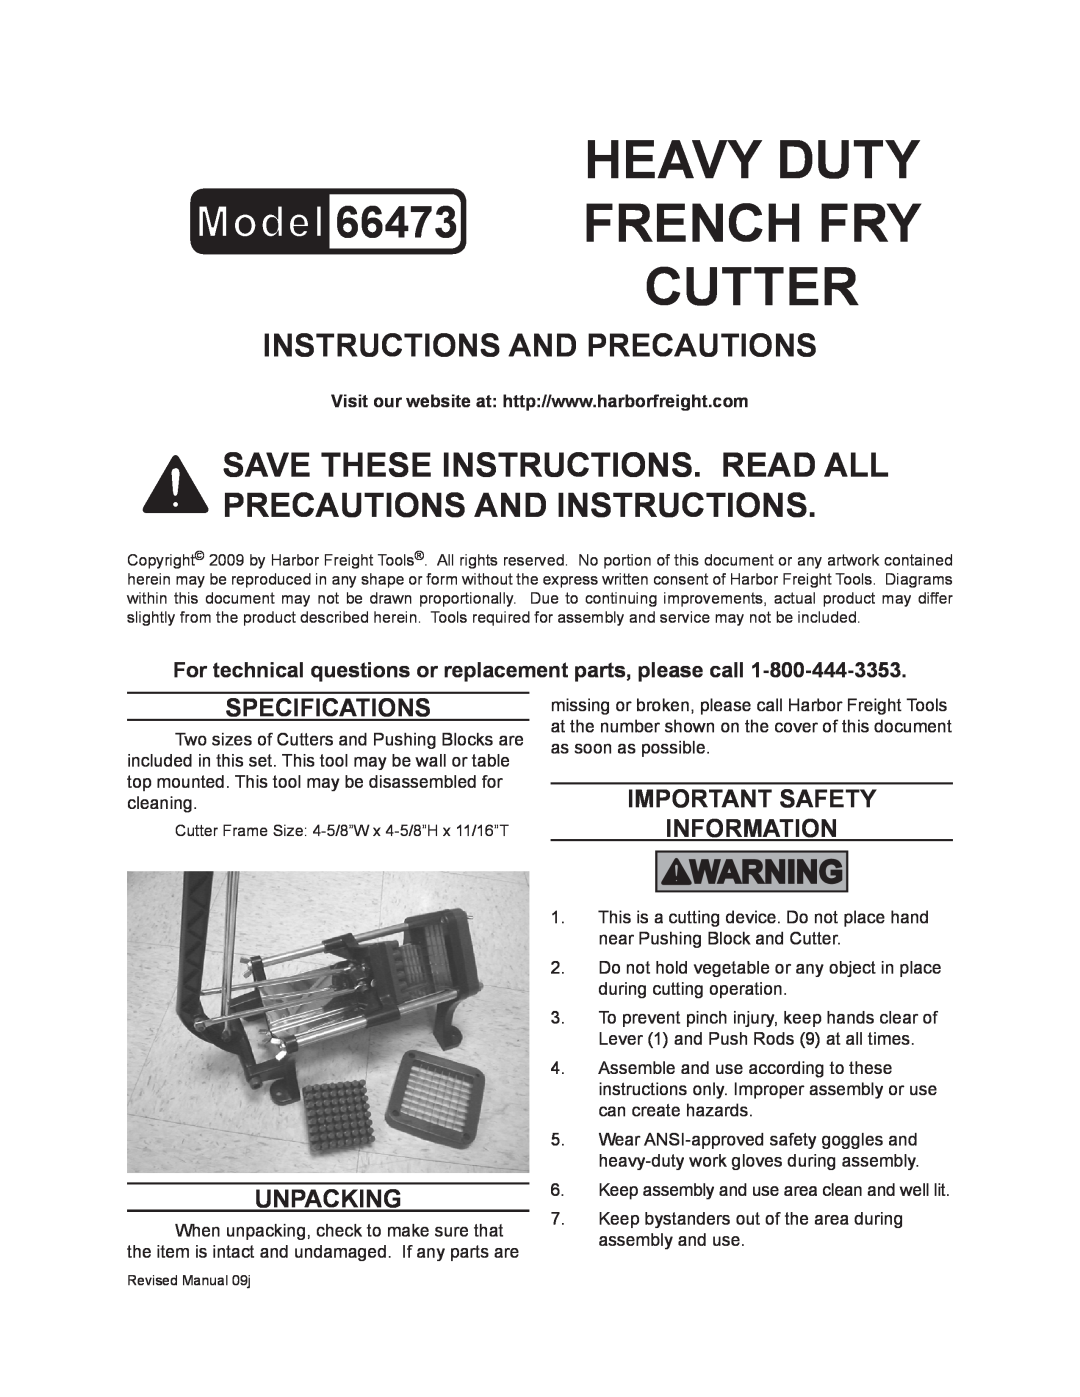 Harbor Freight Tools 66473 specifications Specifications, Unpacking, Important SAFETY Information 